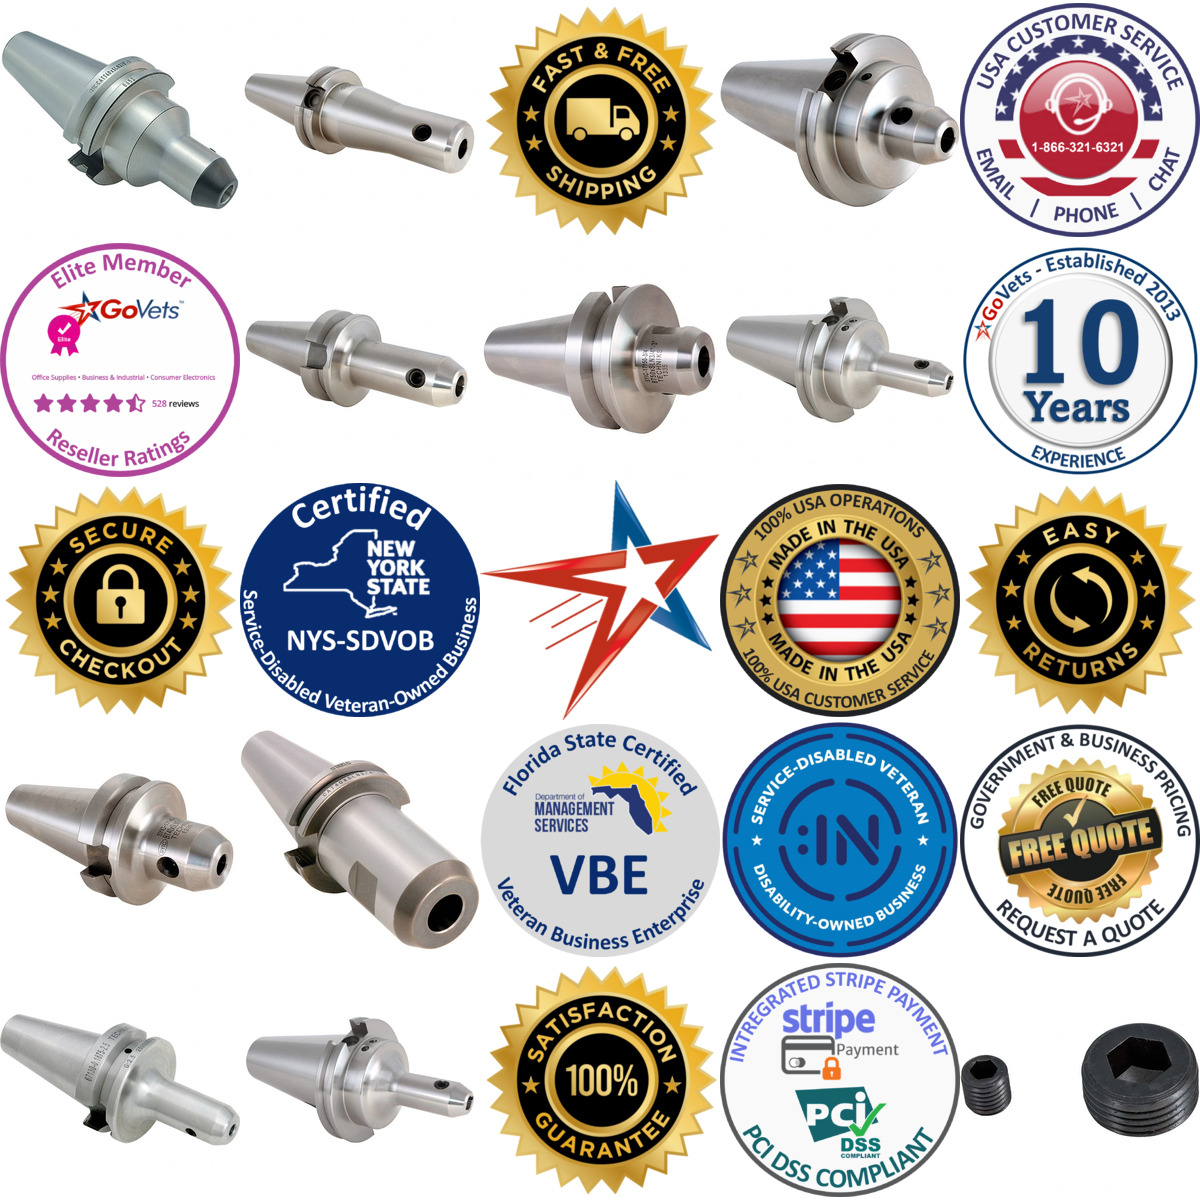 A selection of Collet Chuck Accessories products on GoVets